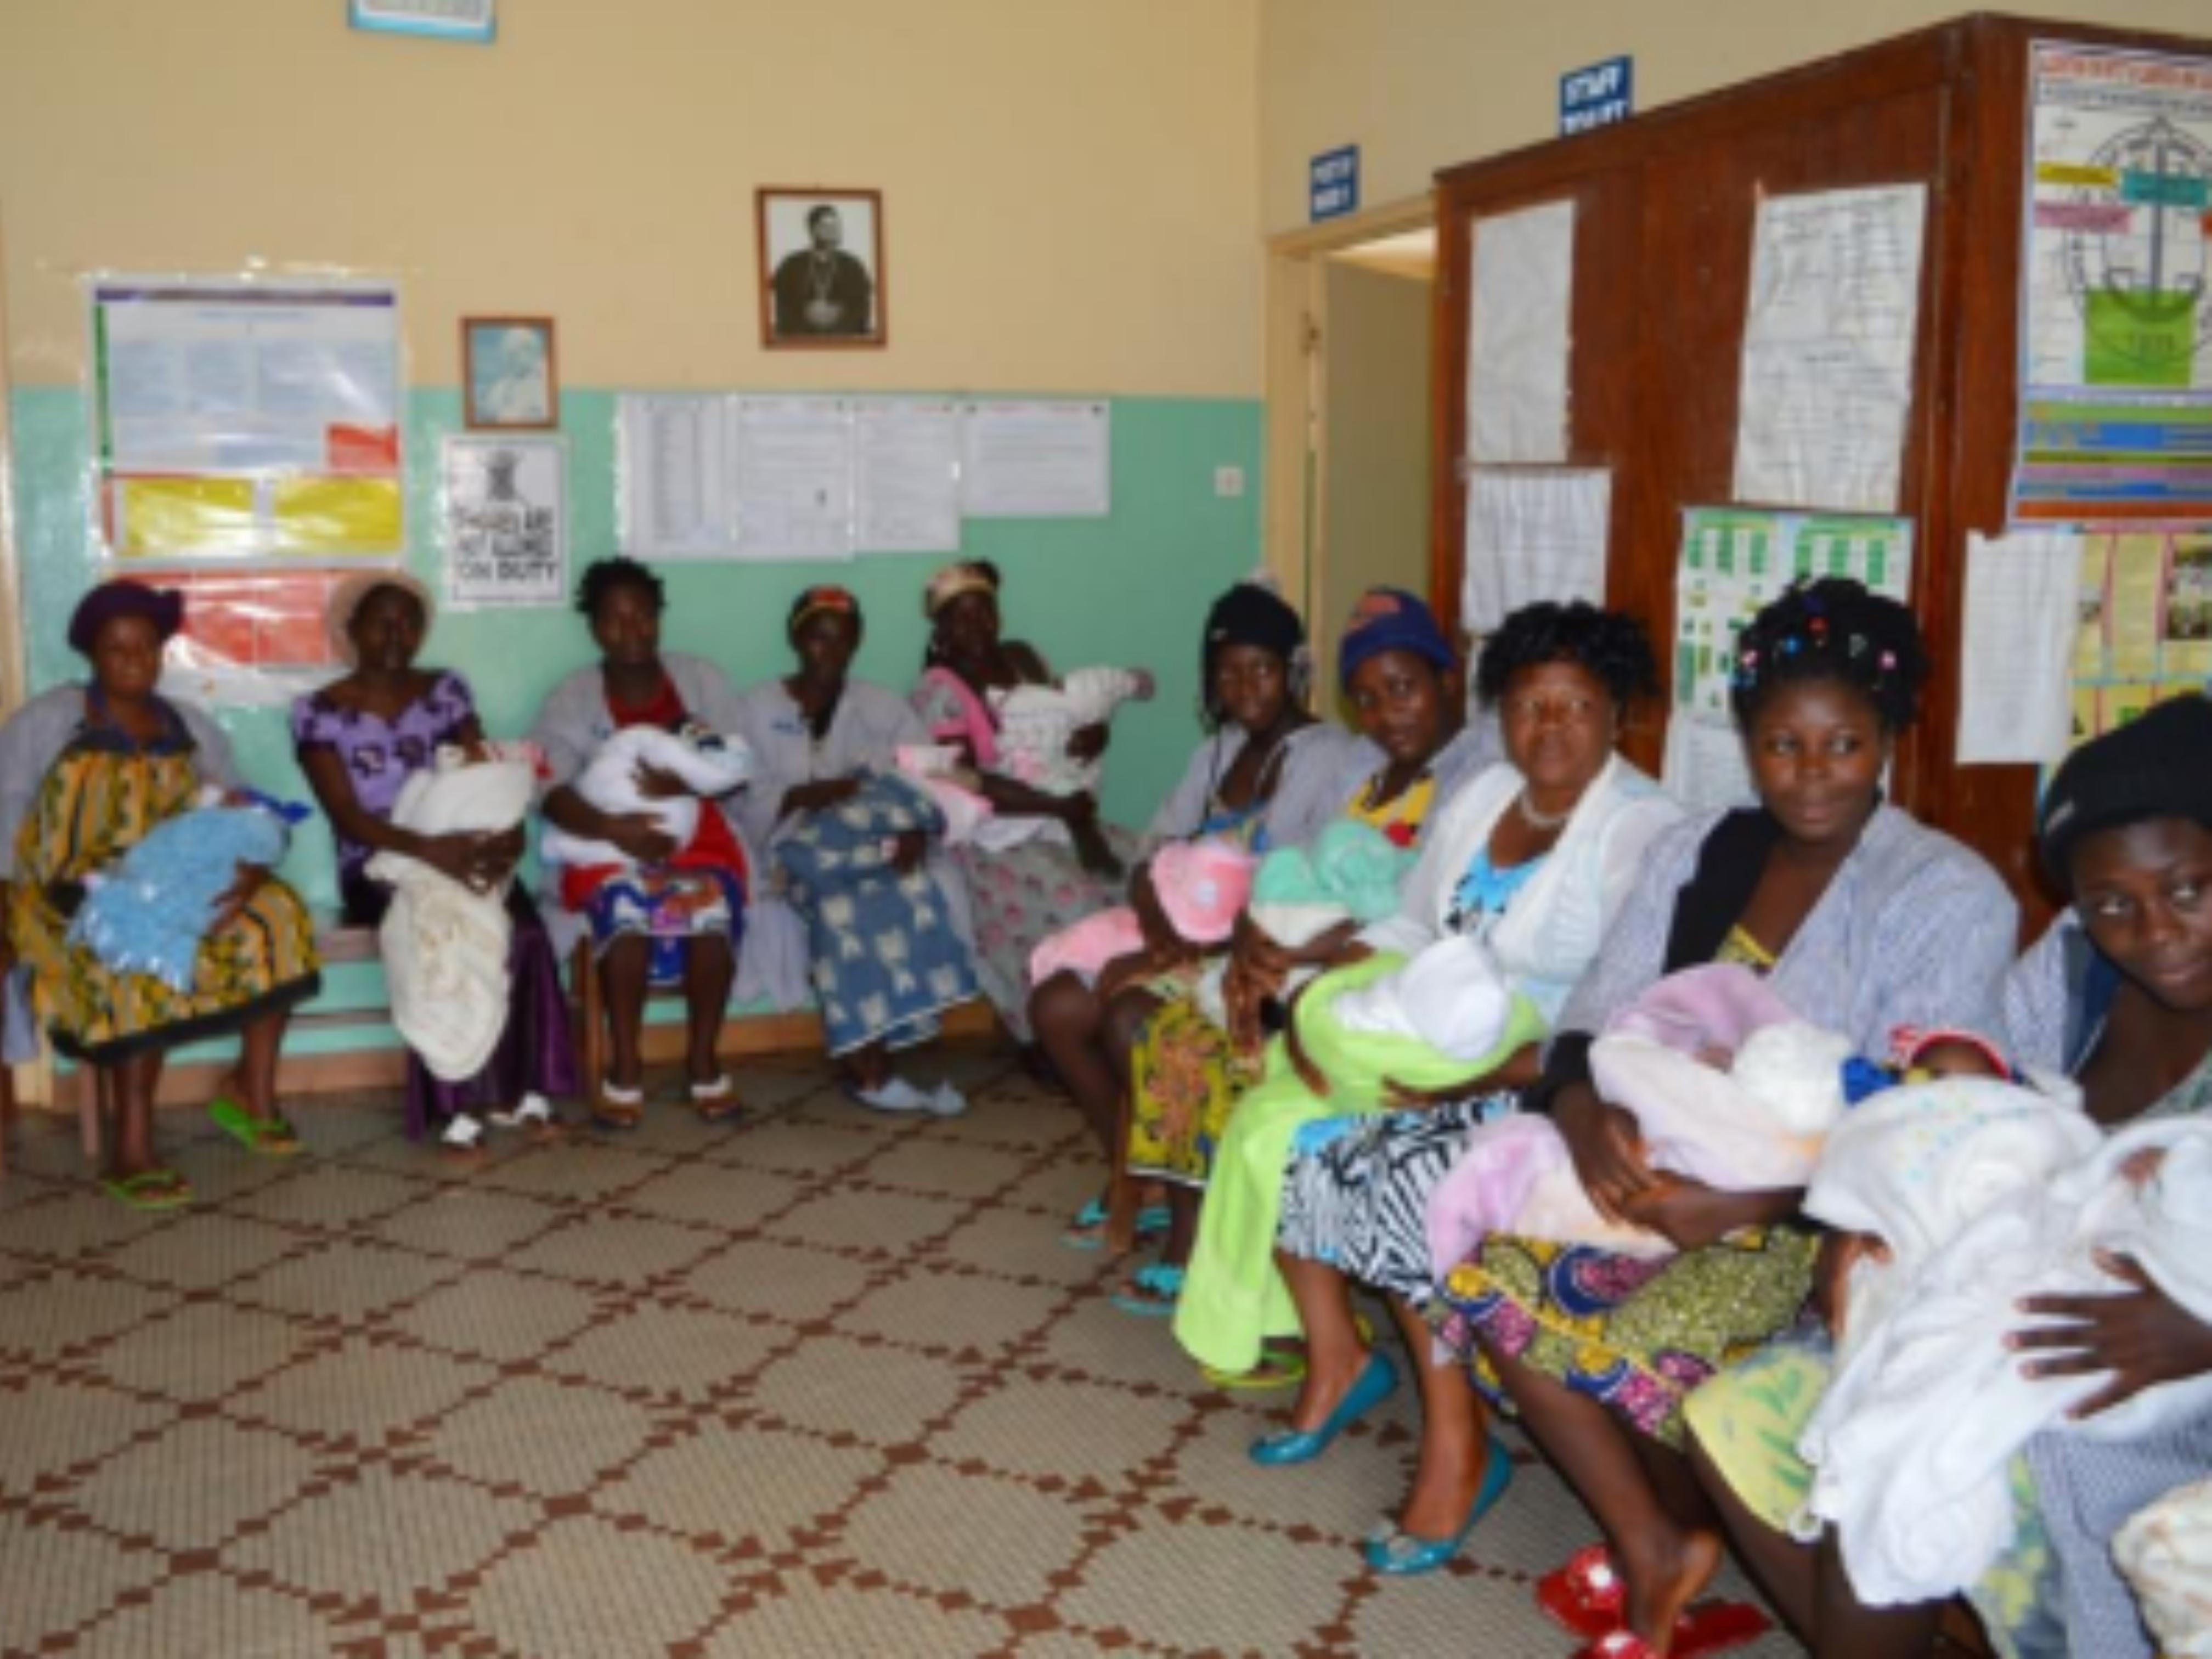 The obstetrical waiting room with mothers during health education.